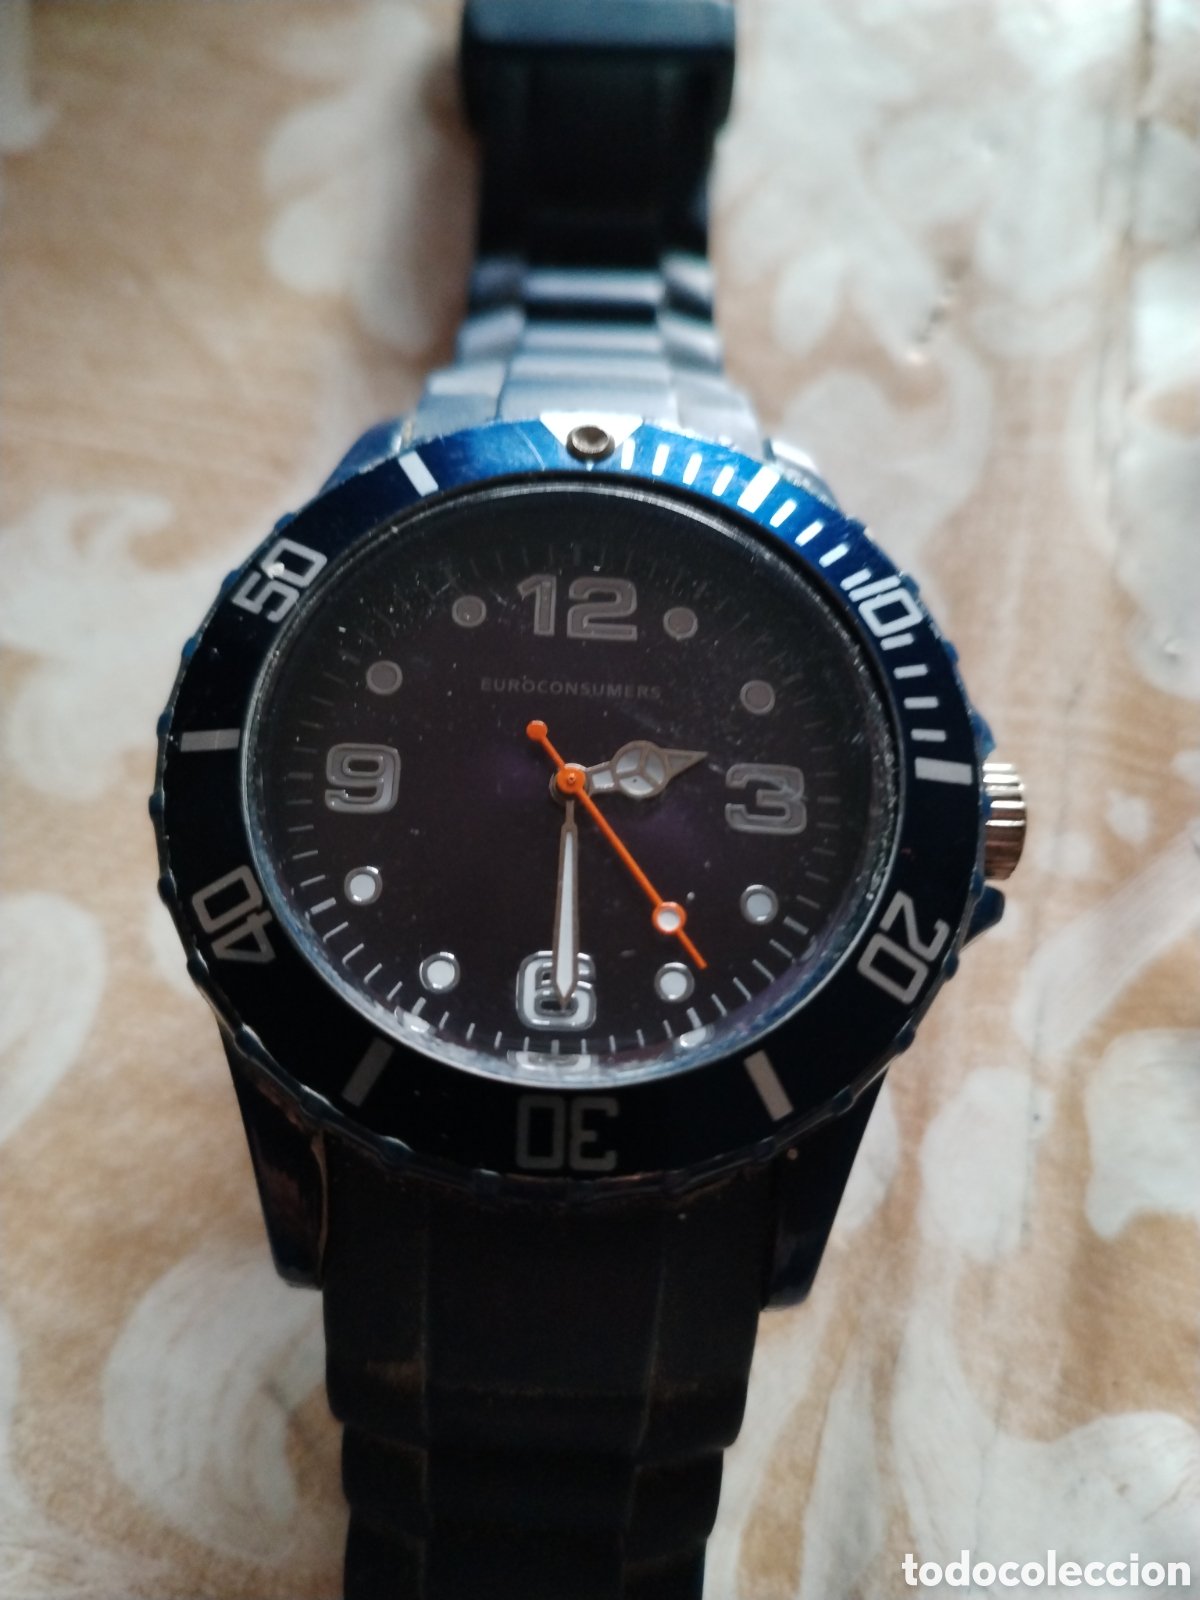 reloj lanscotte - Buy Watches from other current brands on todocoleccion